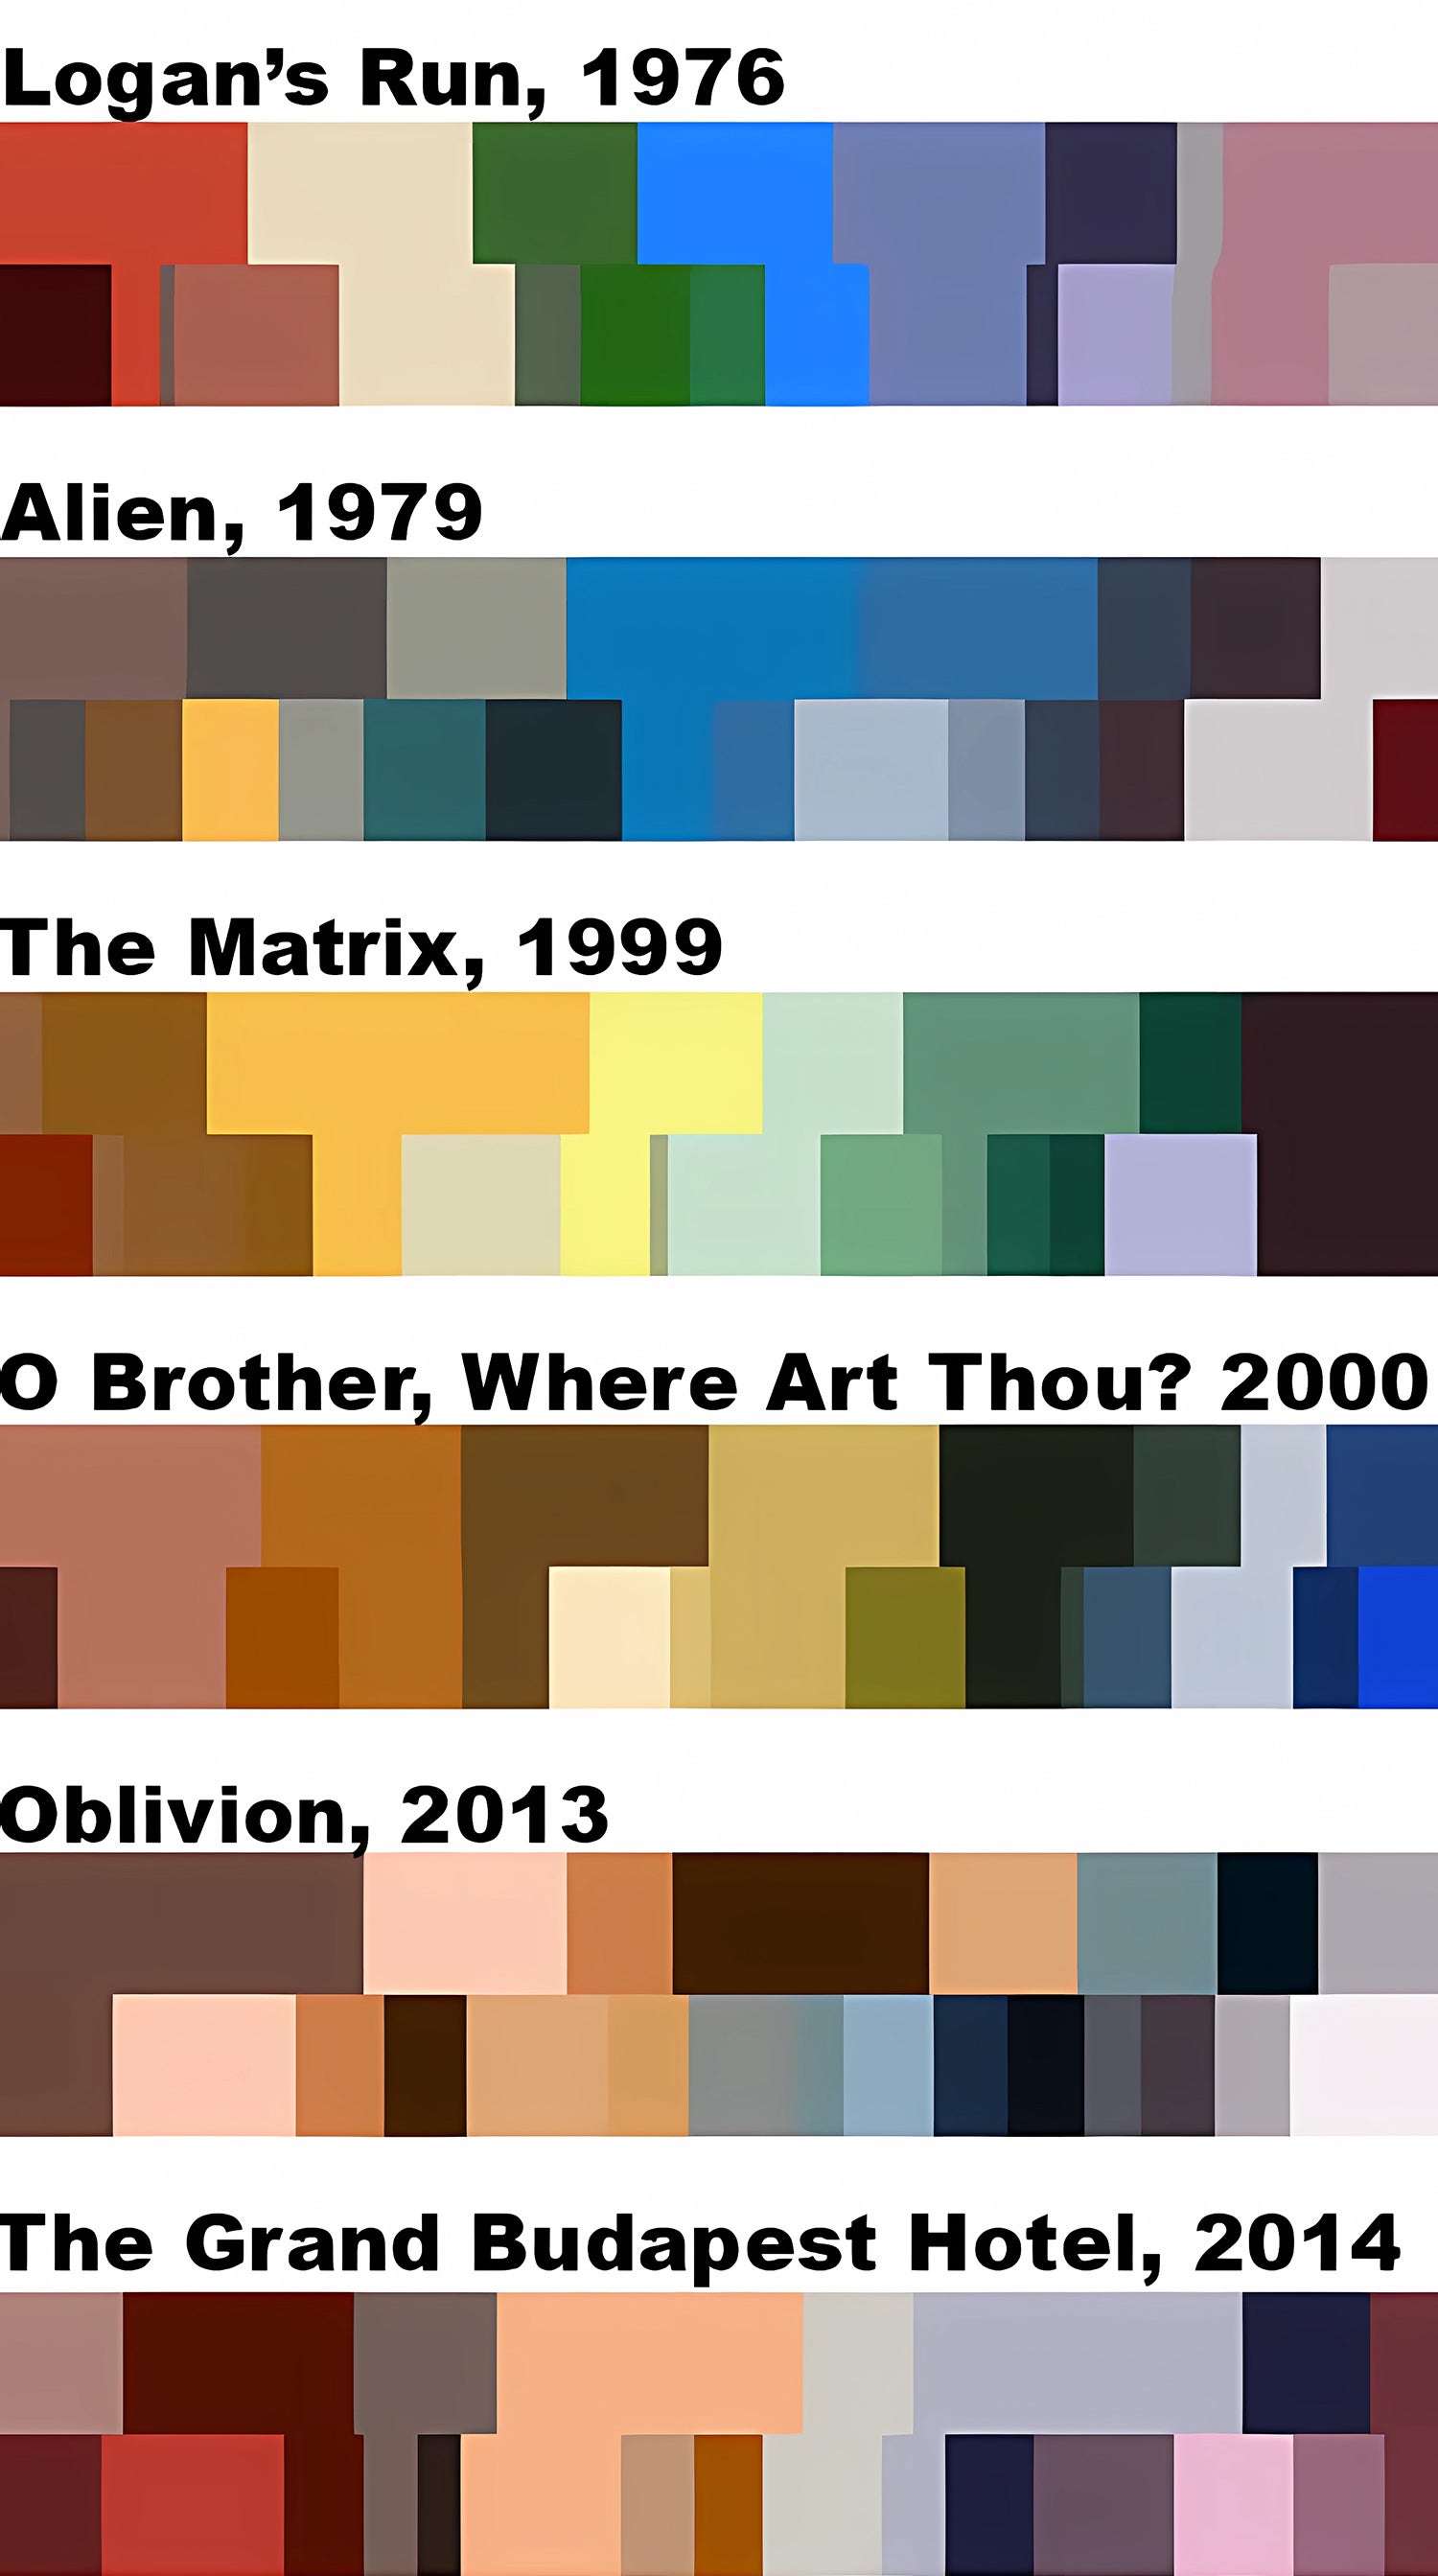 image showing colour palettes from films of different genres and eras